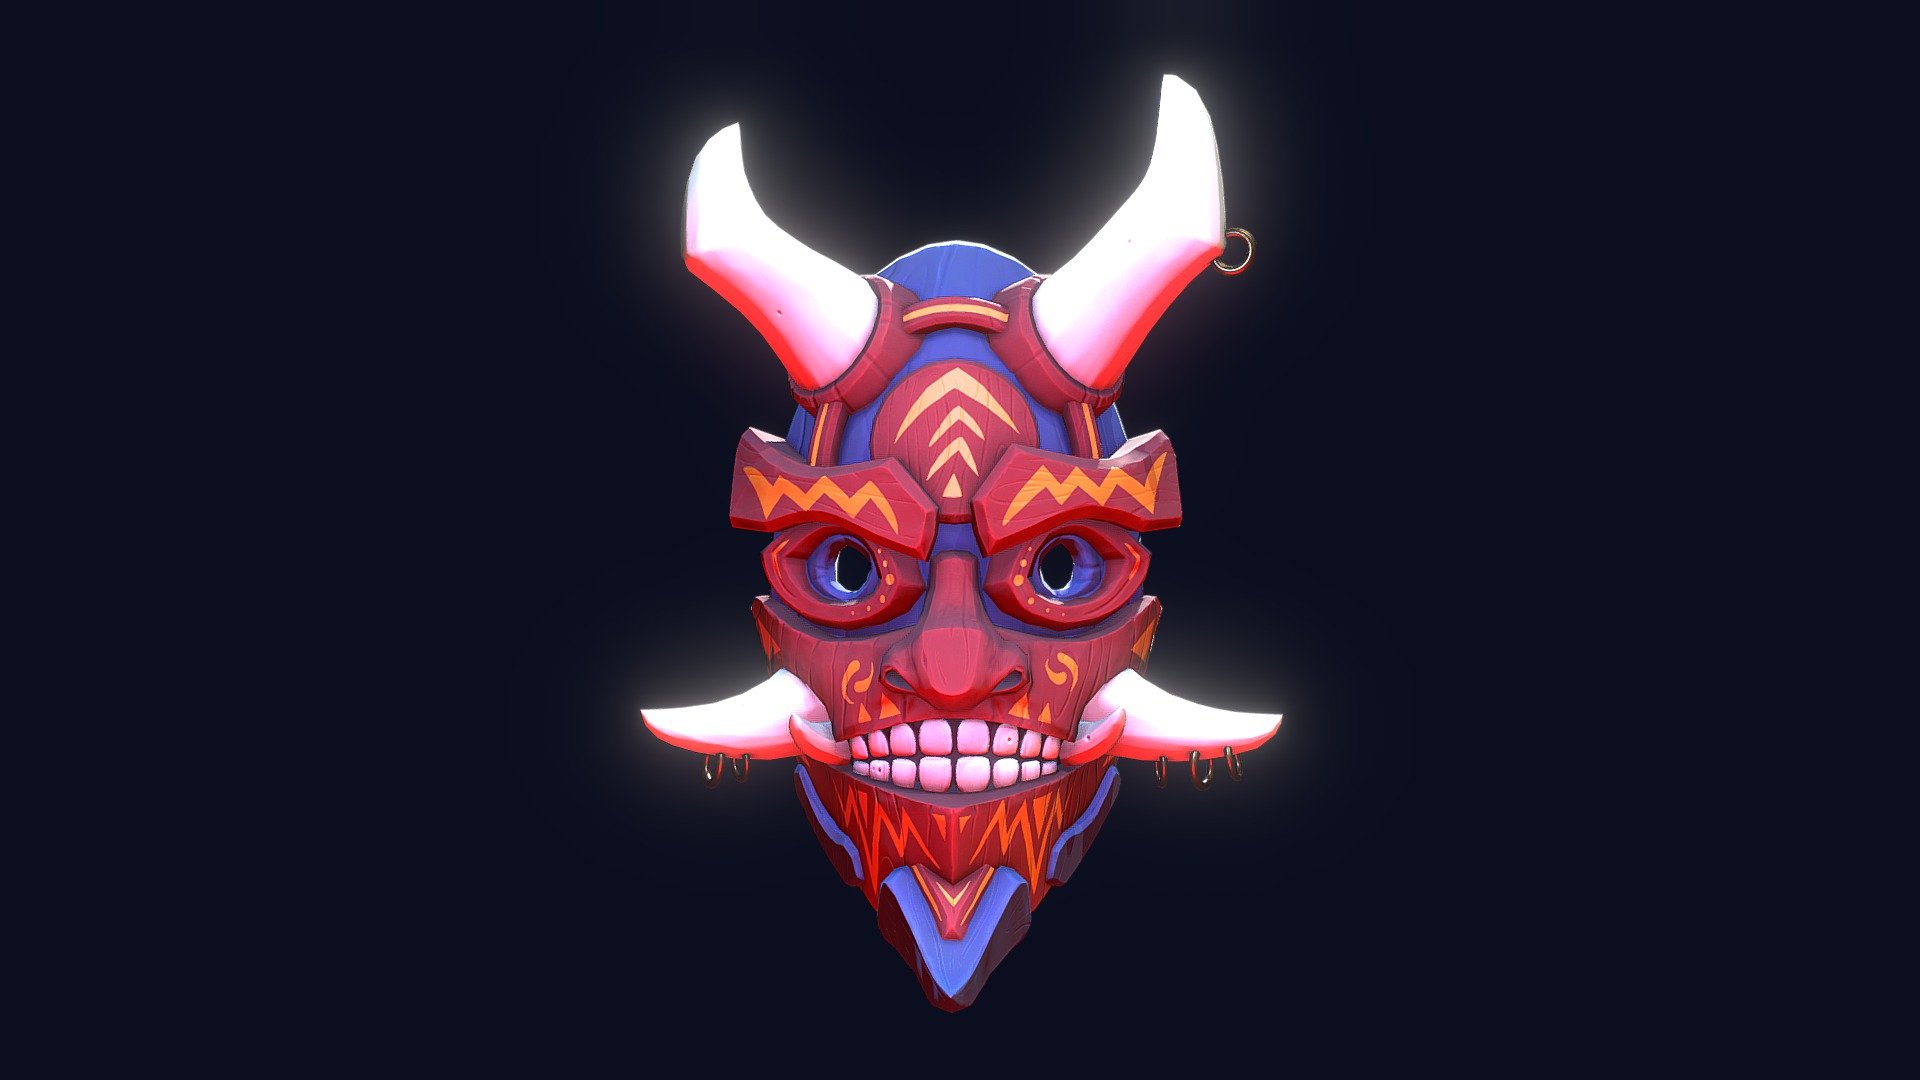 Hey! Been a long time since I made a post~
Here's a mask I made inspired by my trip to the Australian Museum where I got to see all kinda of cool different masks from various cultures! - Ceremonial Mask - 3D model by Eriction (@erictahiri) 3d model